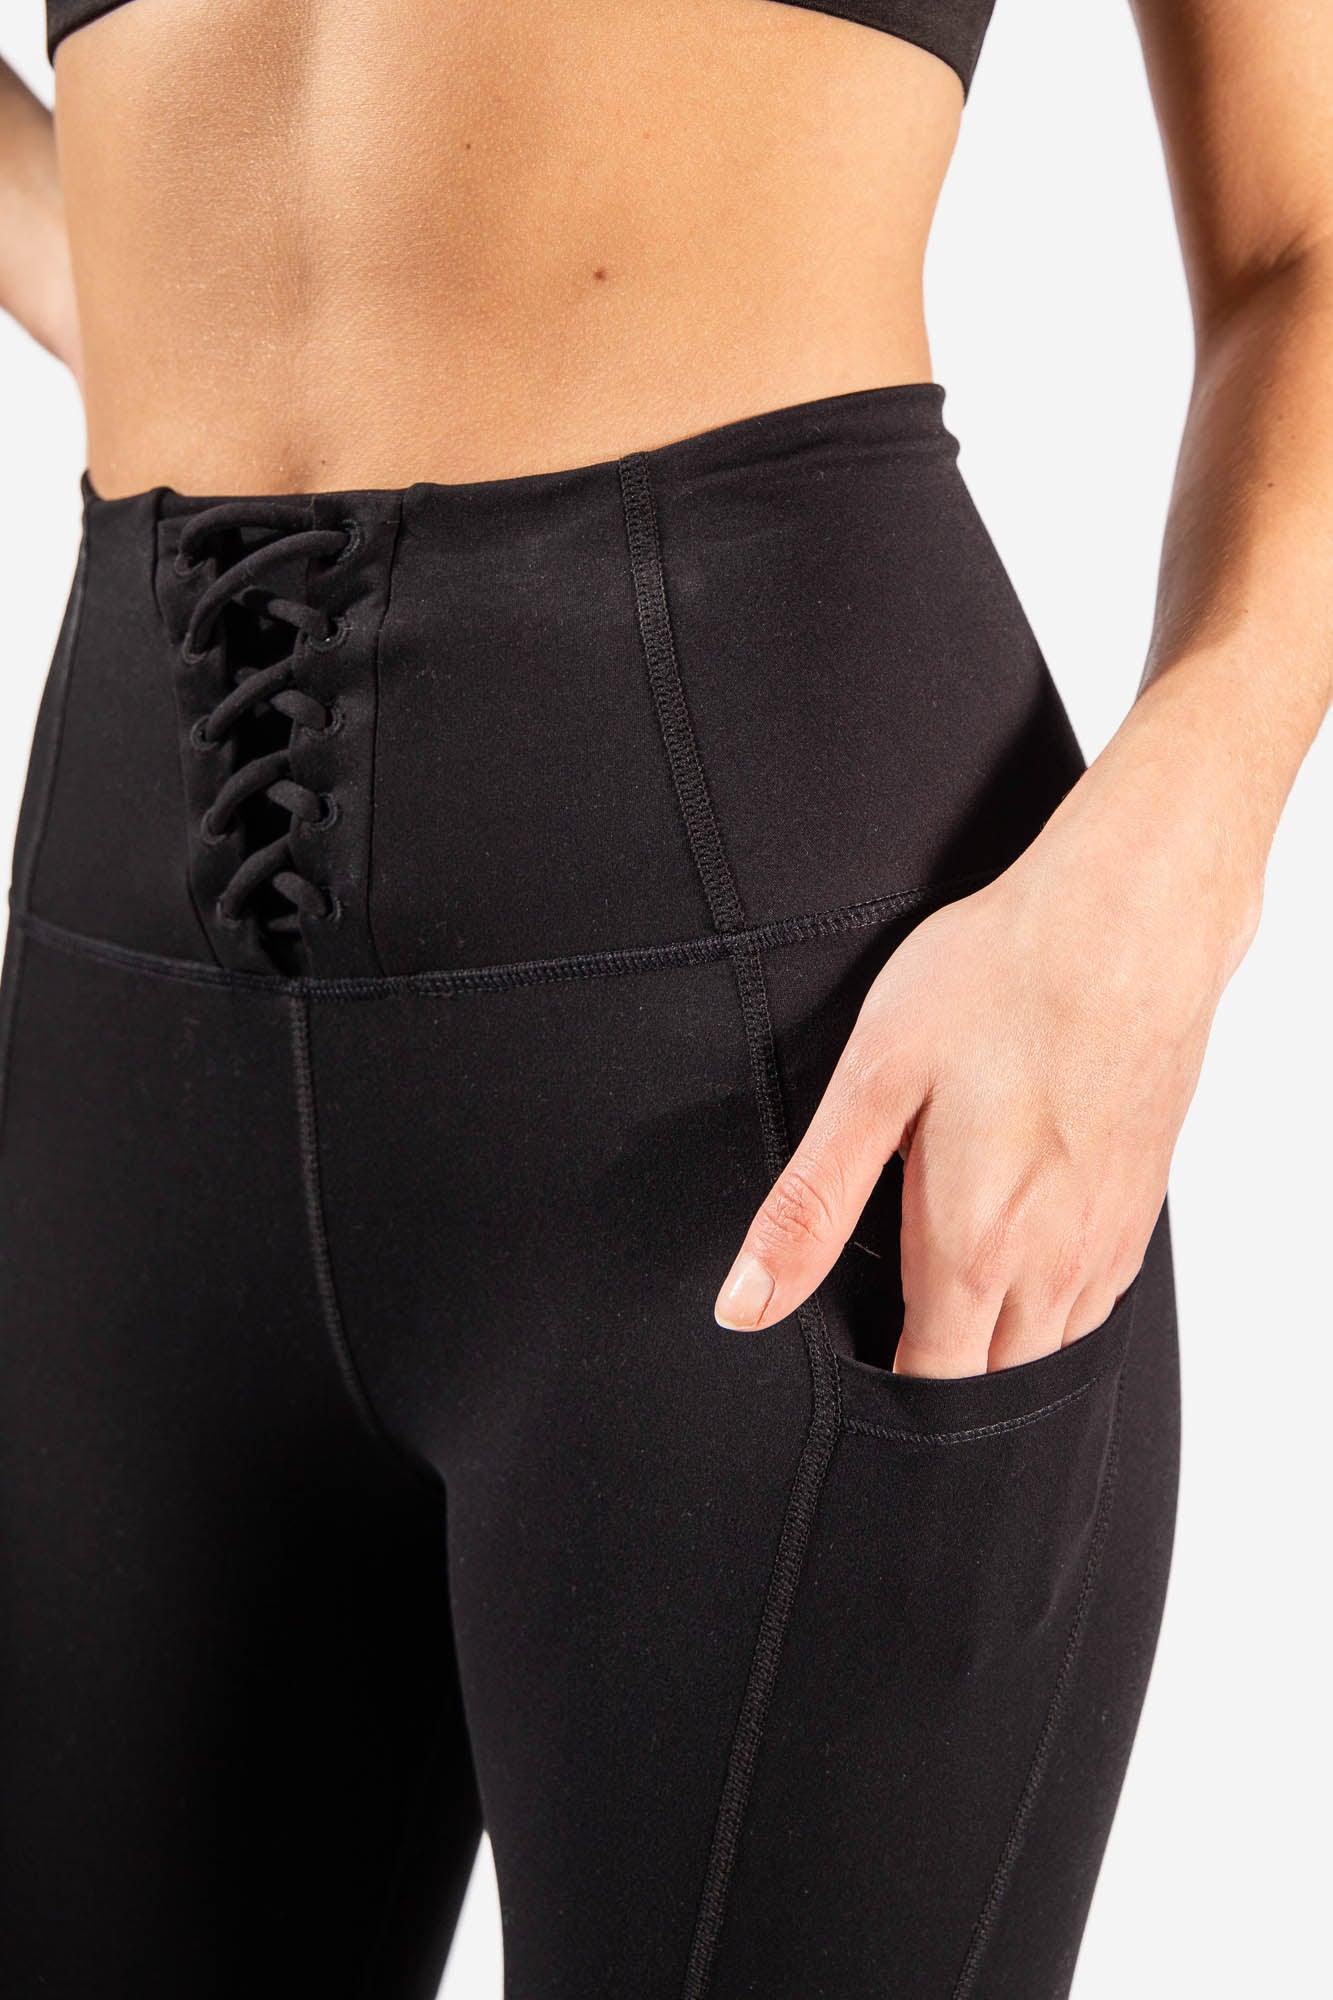 Do Fabletics Leggings Stretch Out Strap